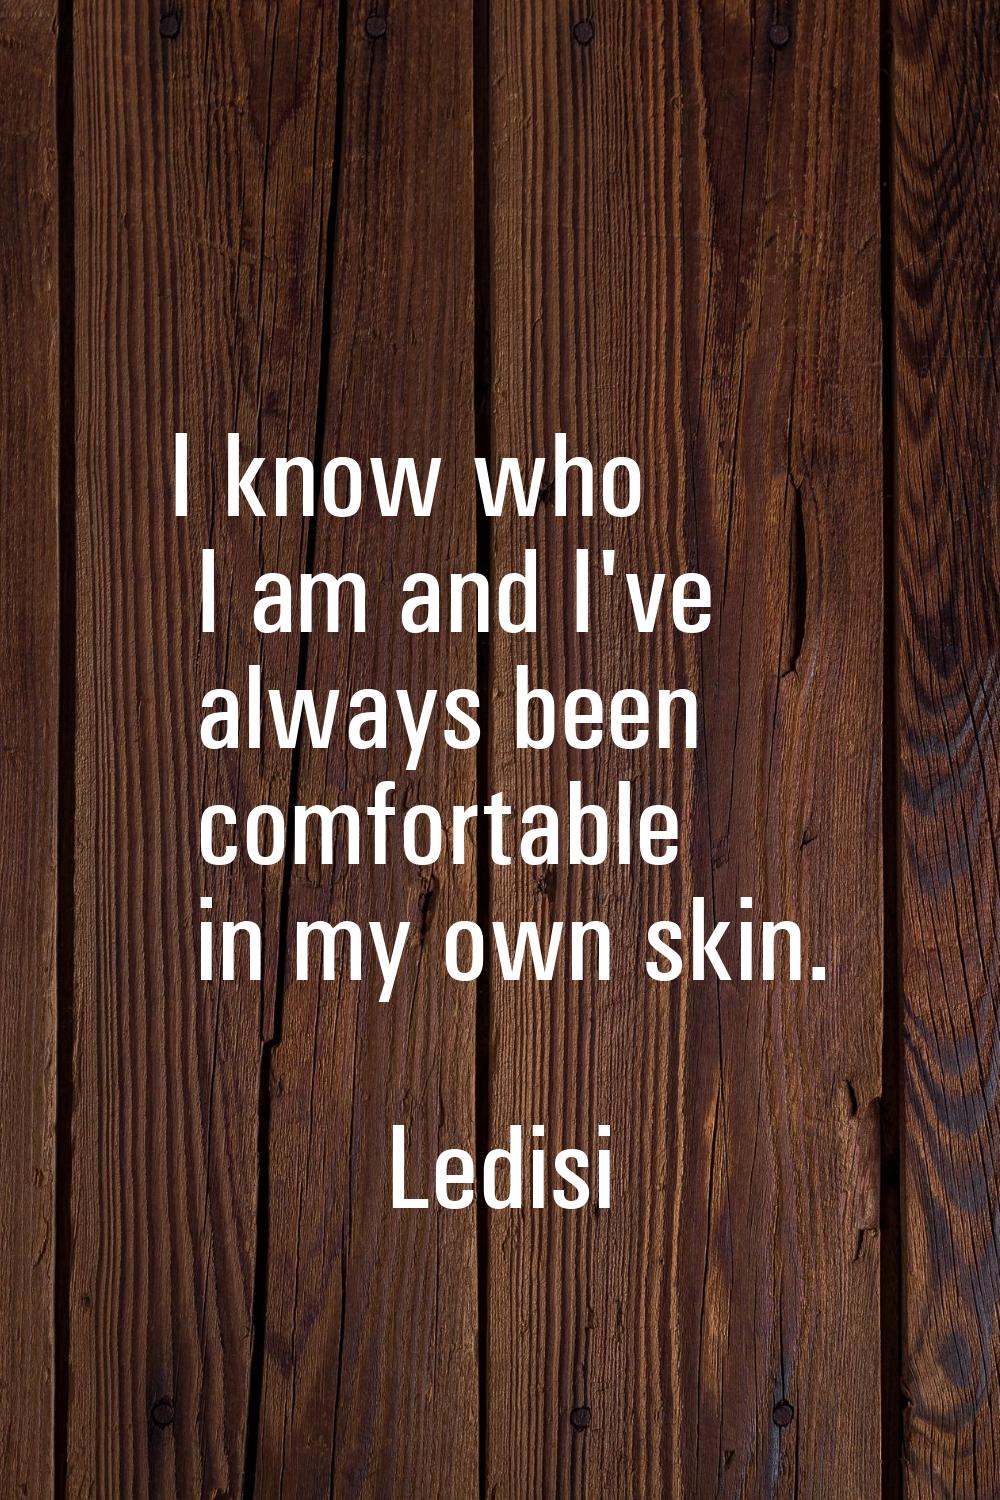 I know who I am and I've always been comfortable in my own skin.